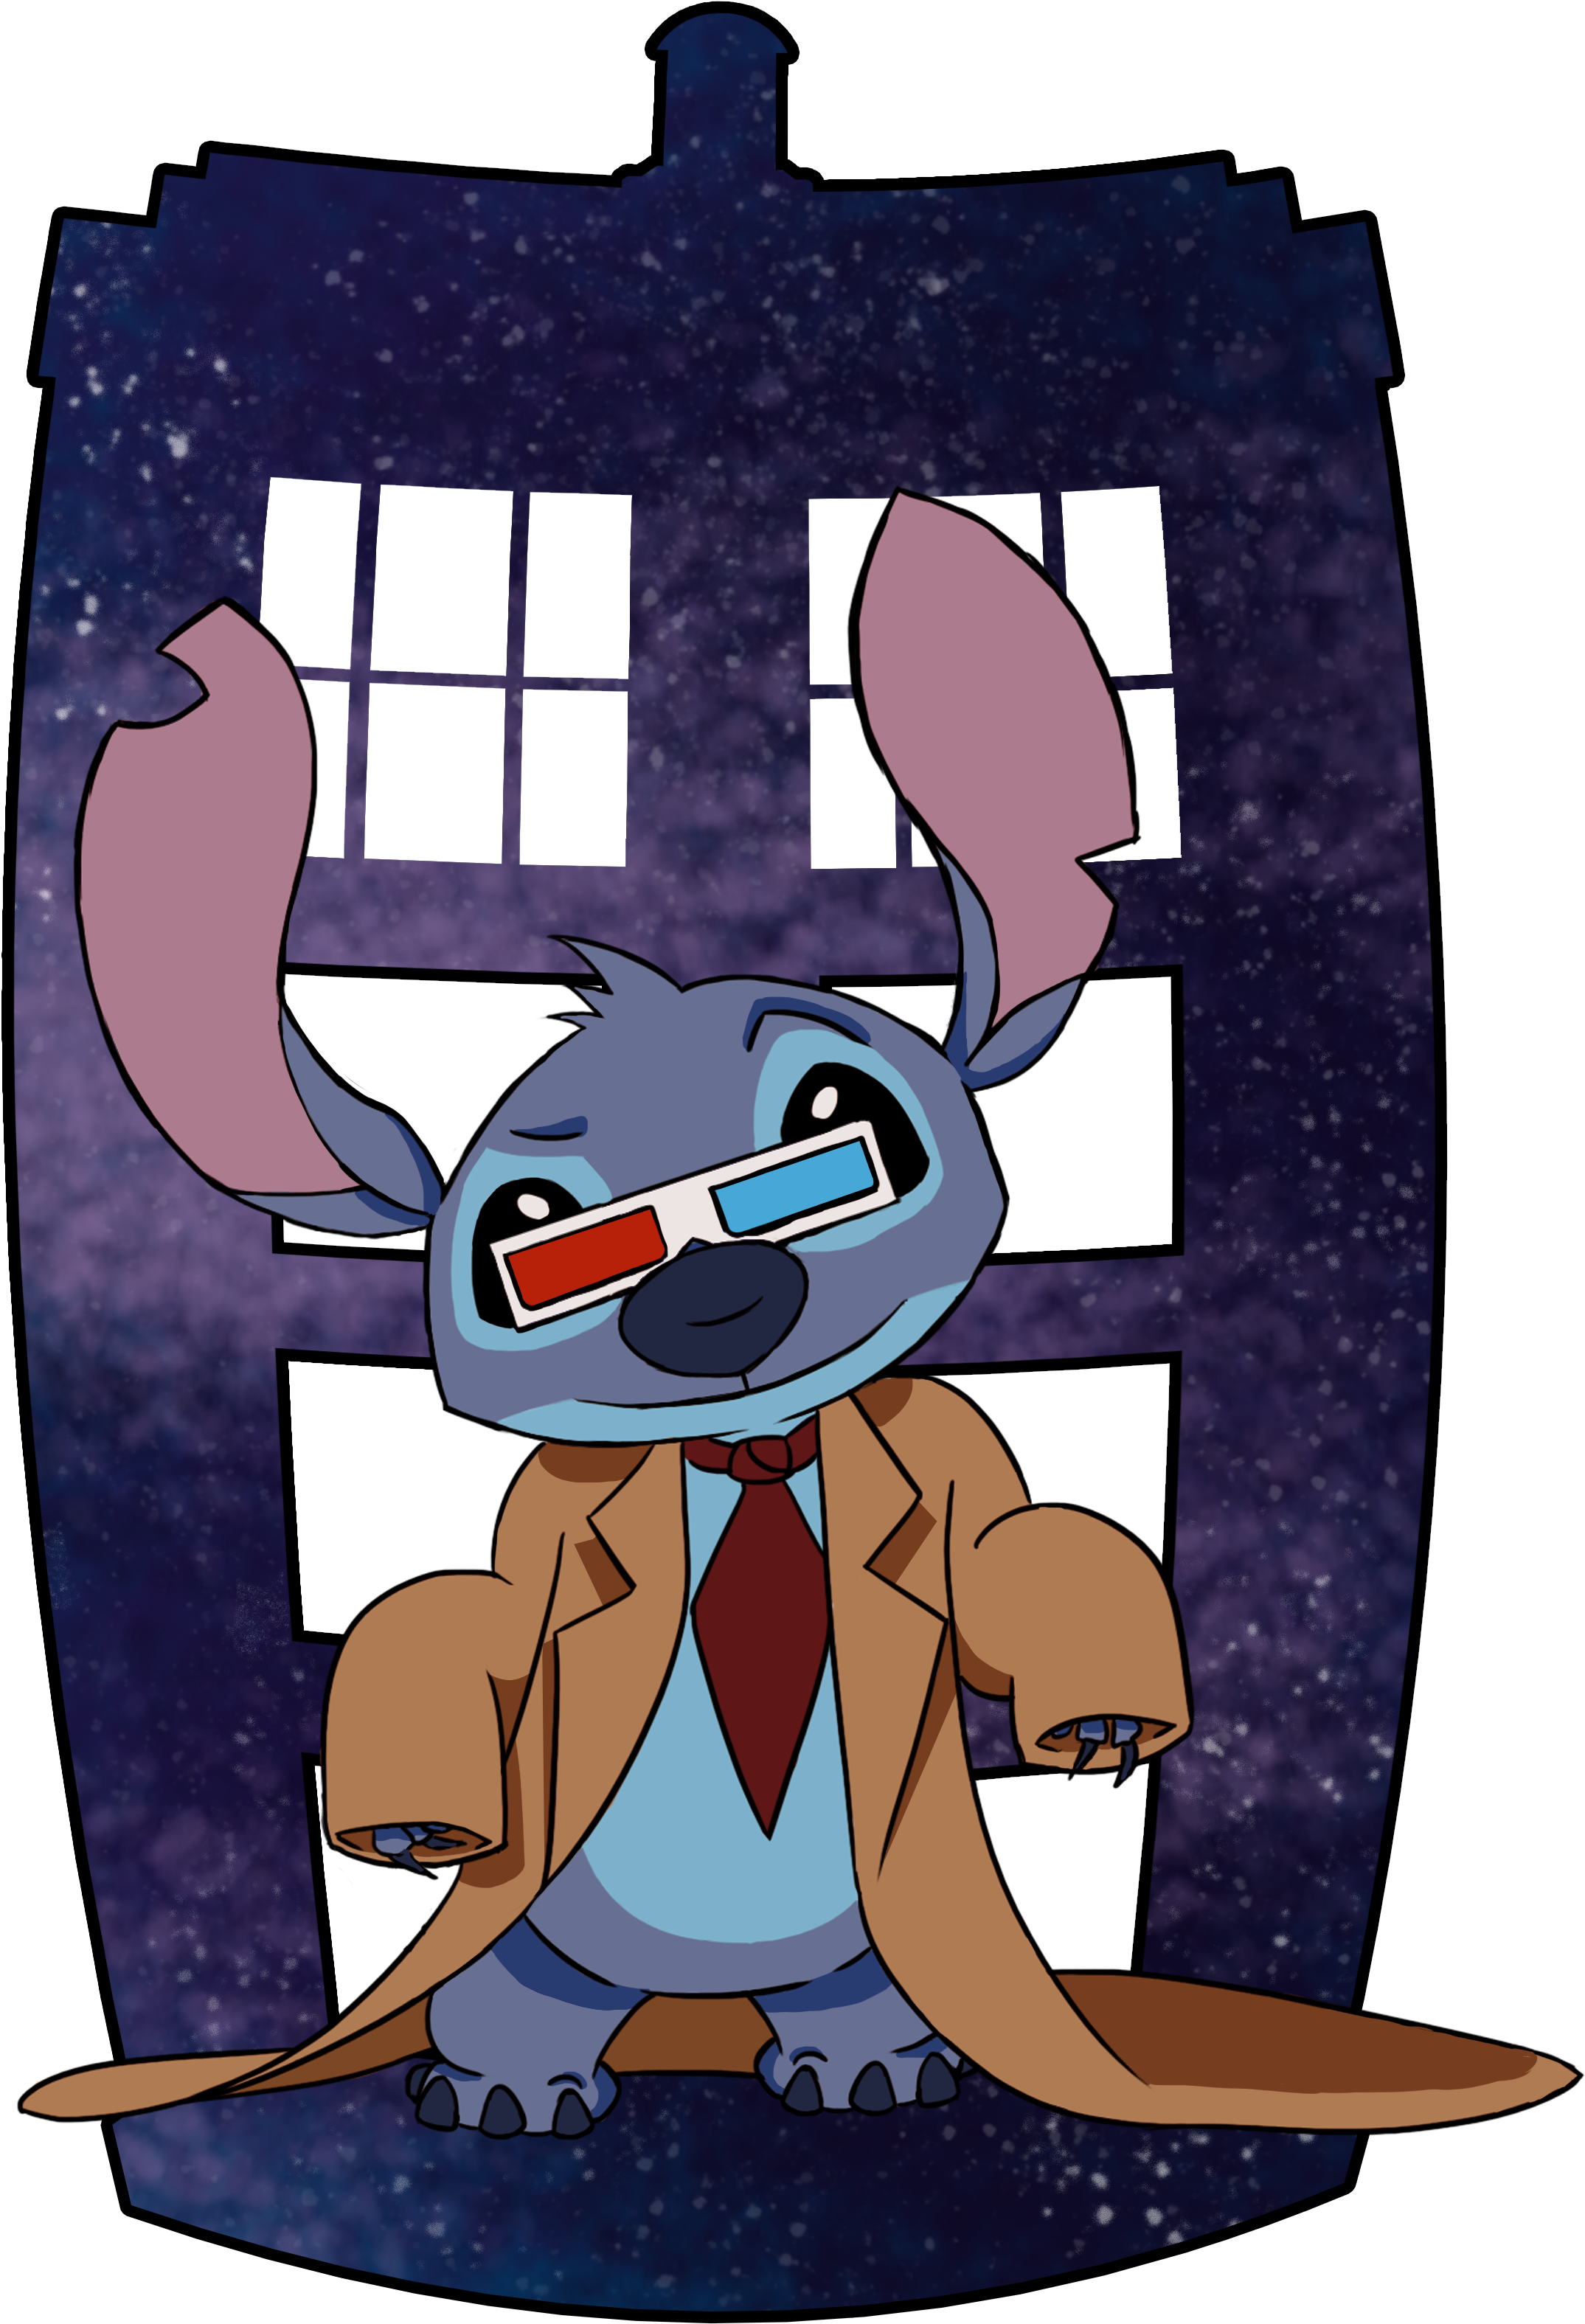 Dr Who And Stitch (2480x3508)